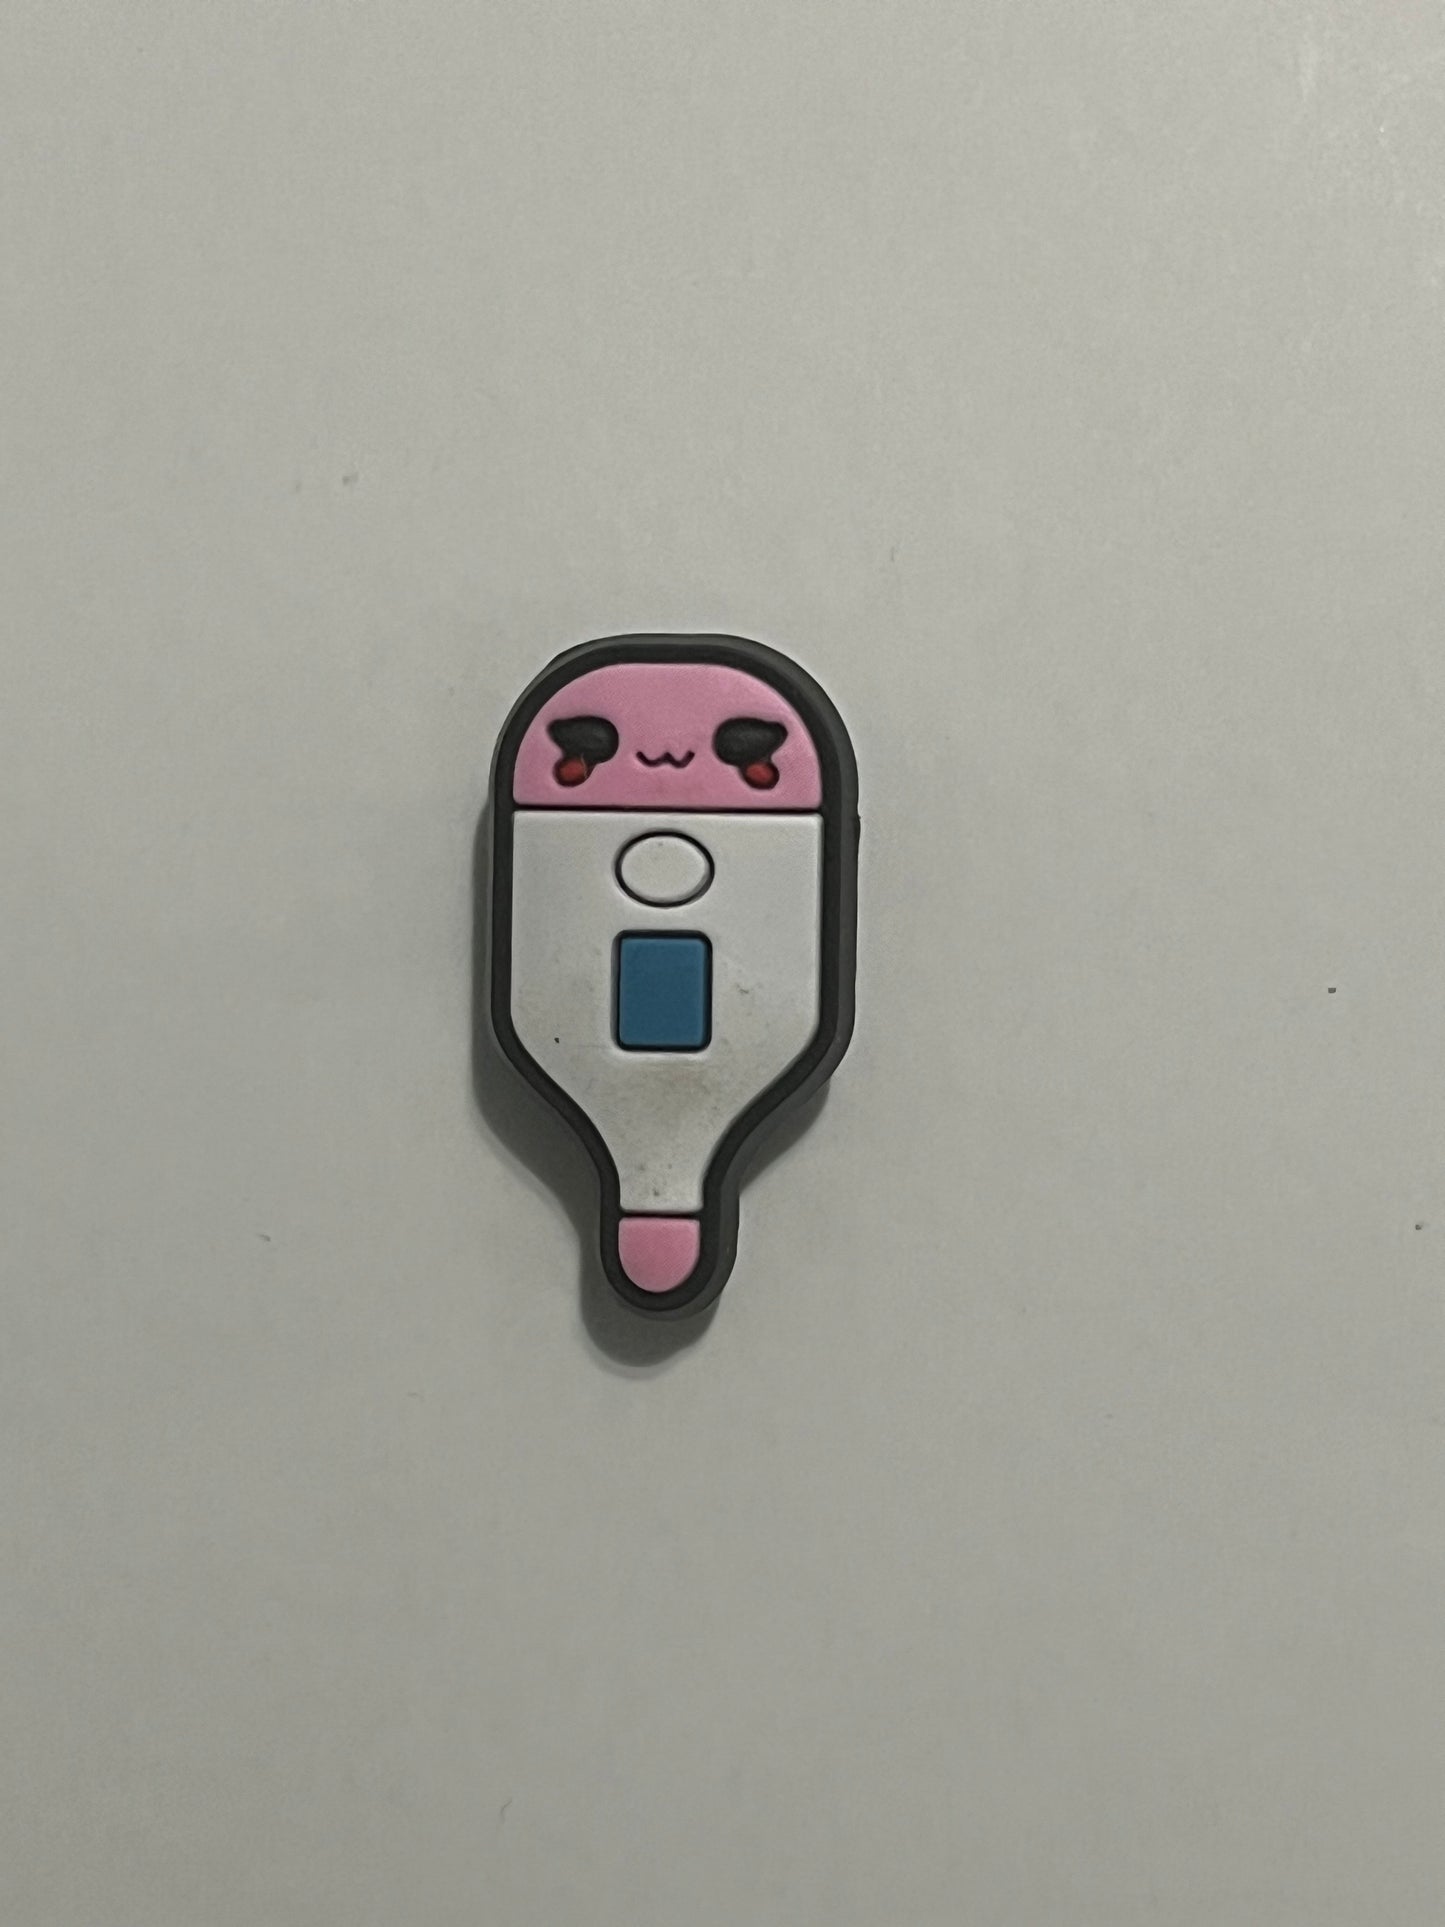 Cute thermometer